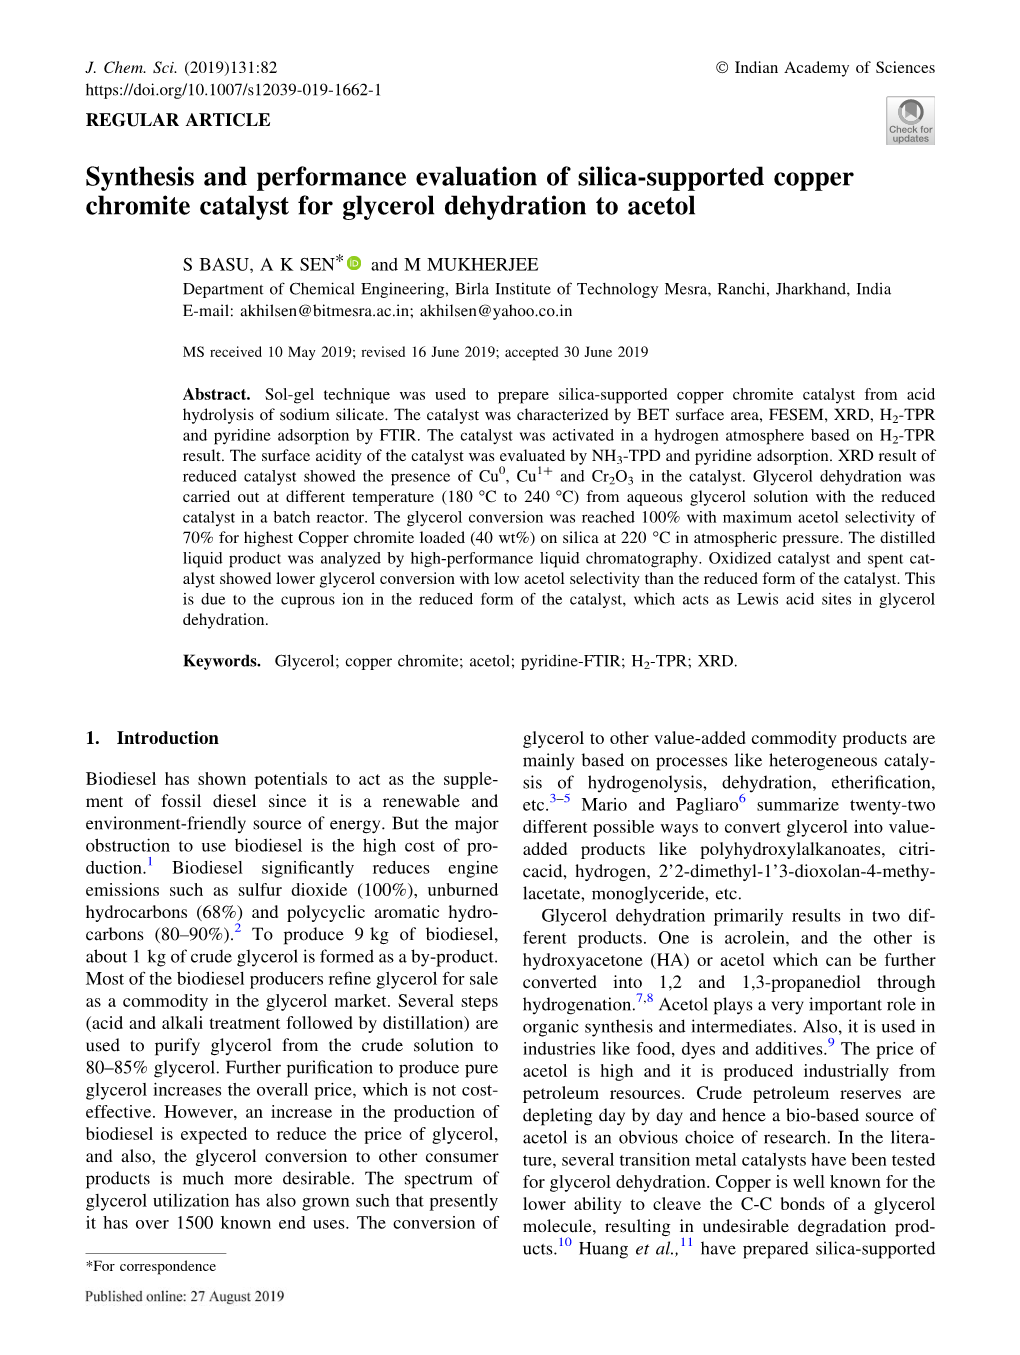 Synthesis and Performance Evaluation of Silica-Supported Copper Chromite Catalyst for Glycerol Dehydration to Acetol